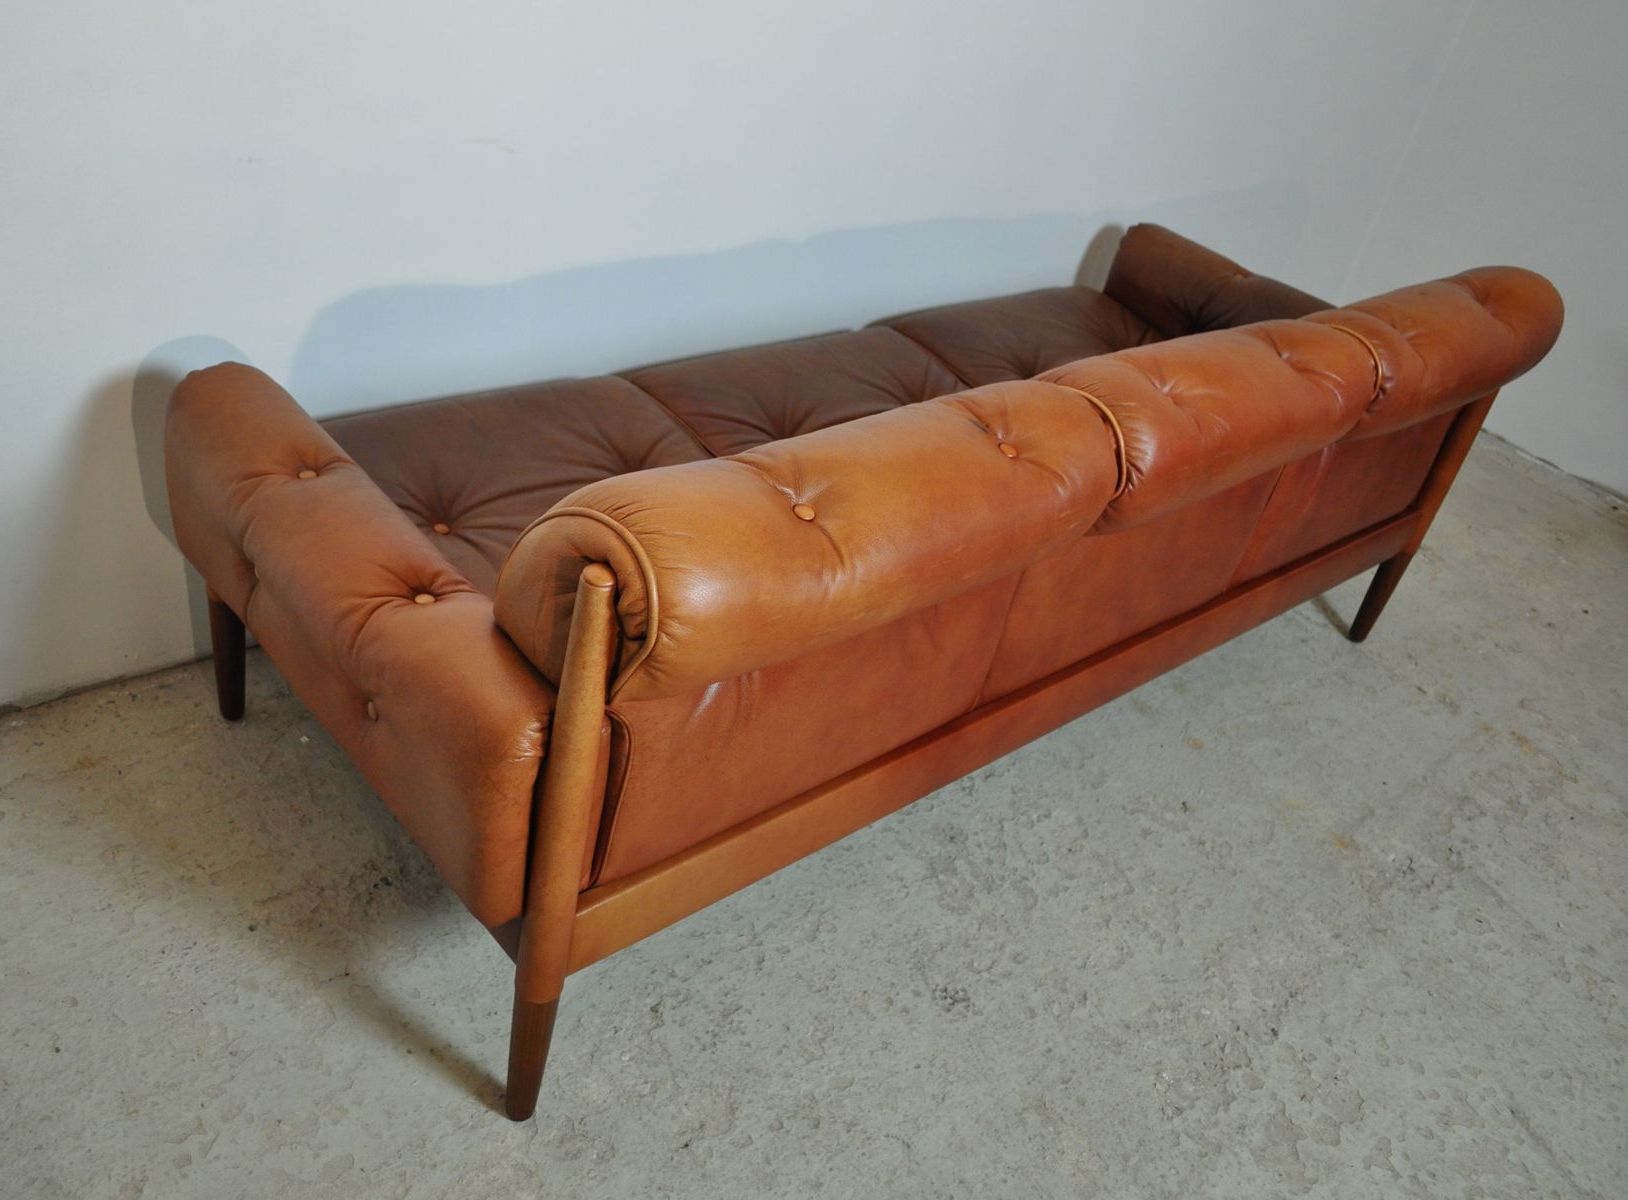 Preferred Scandinavian Cognac Brown Leather And Rosewood 3 Seater Within Florence Mid Century Modern Right Sectional Sofas Cognac Tan (View 22 of 25)